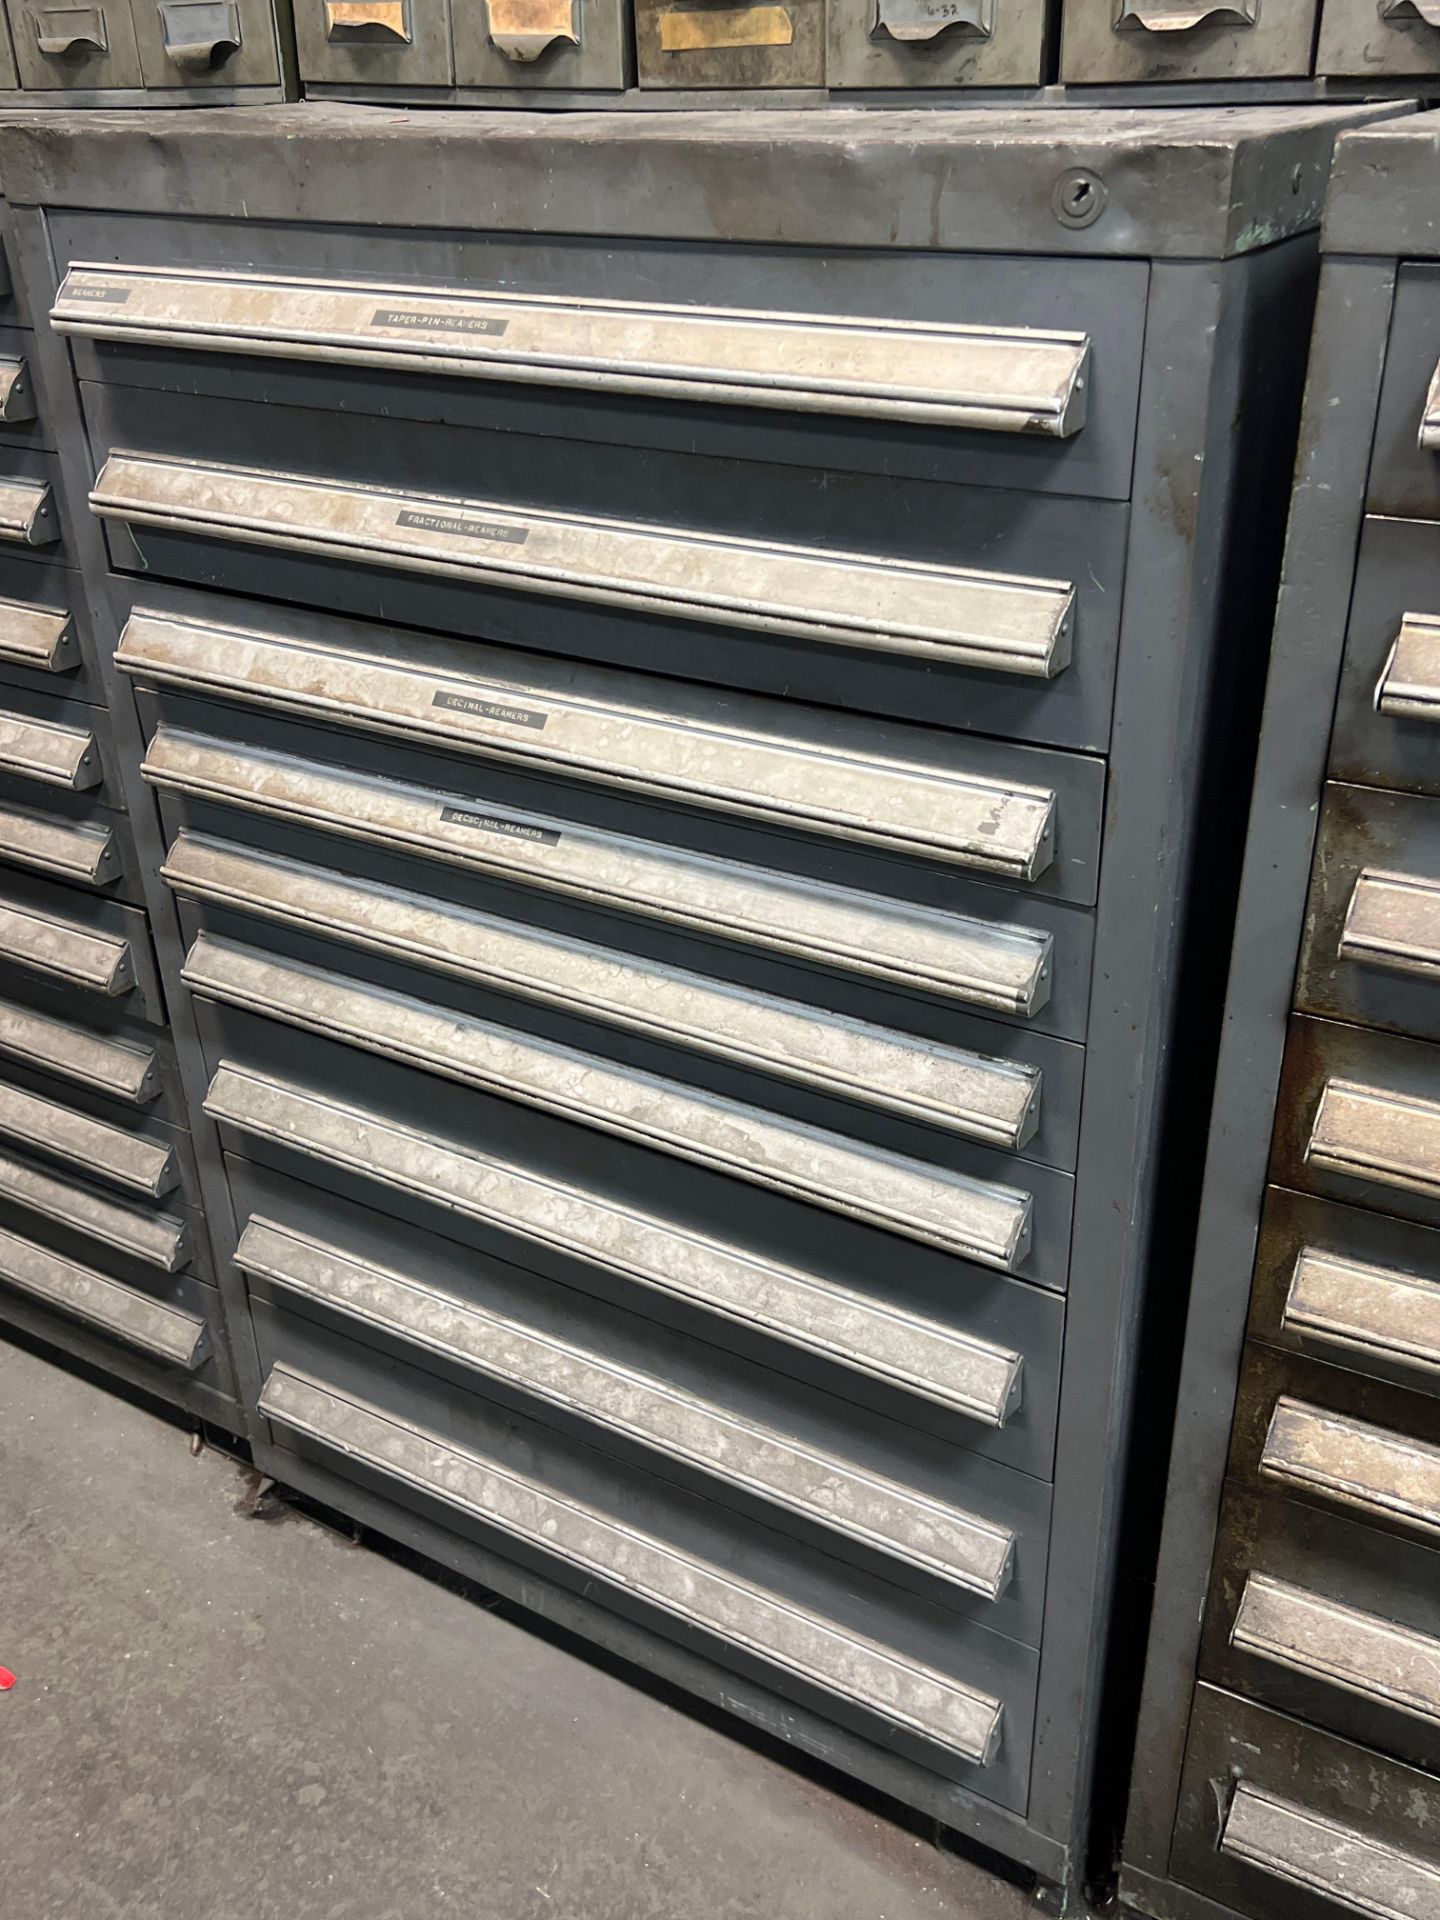 9 Drawer Vidmar Like Cabinet w/ Contents - Image 2 of 11